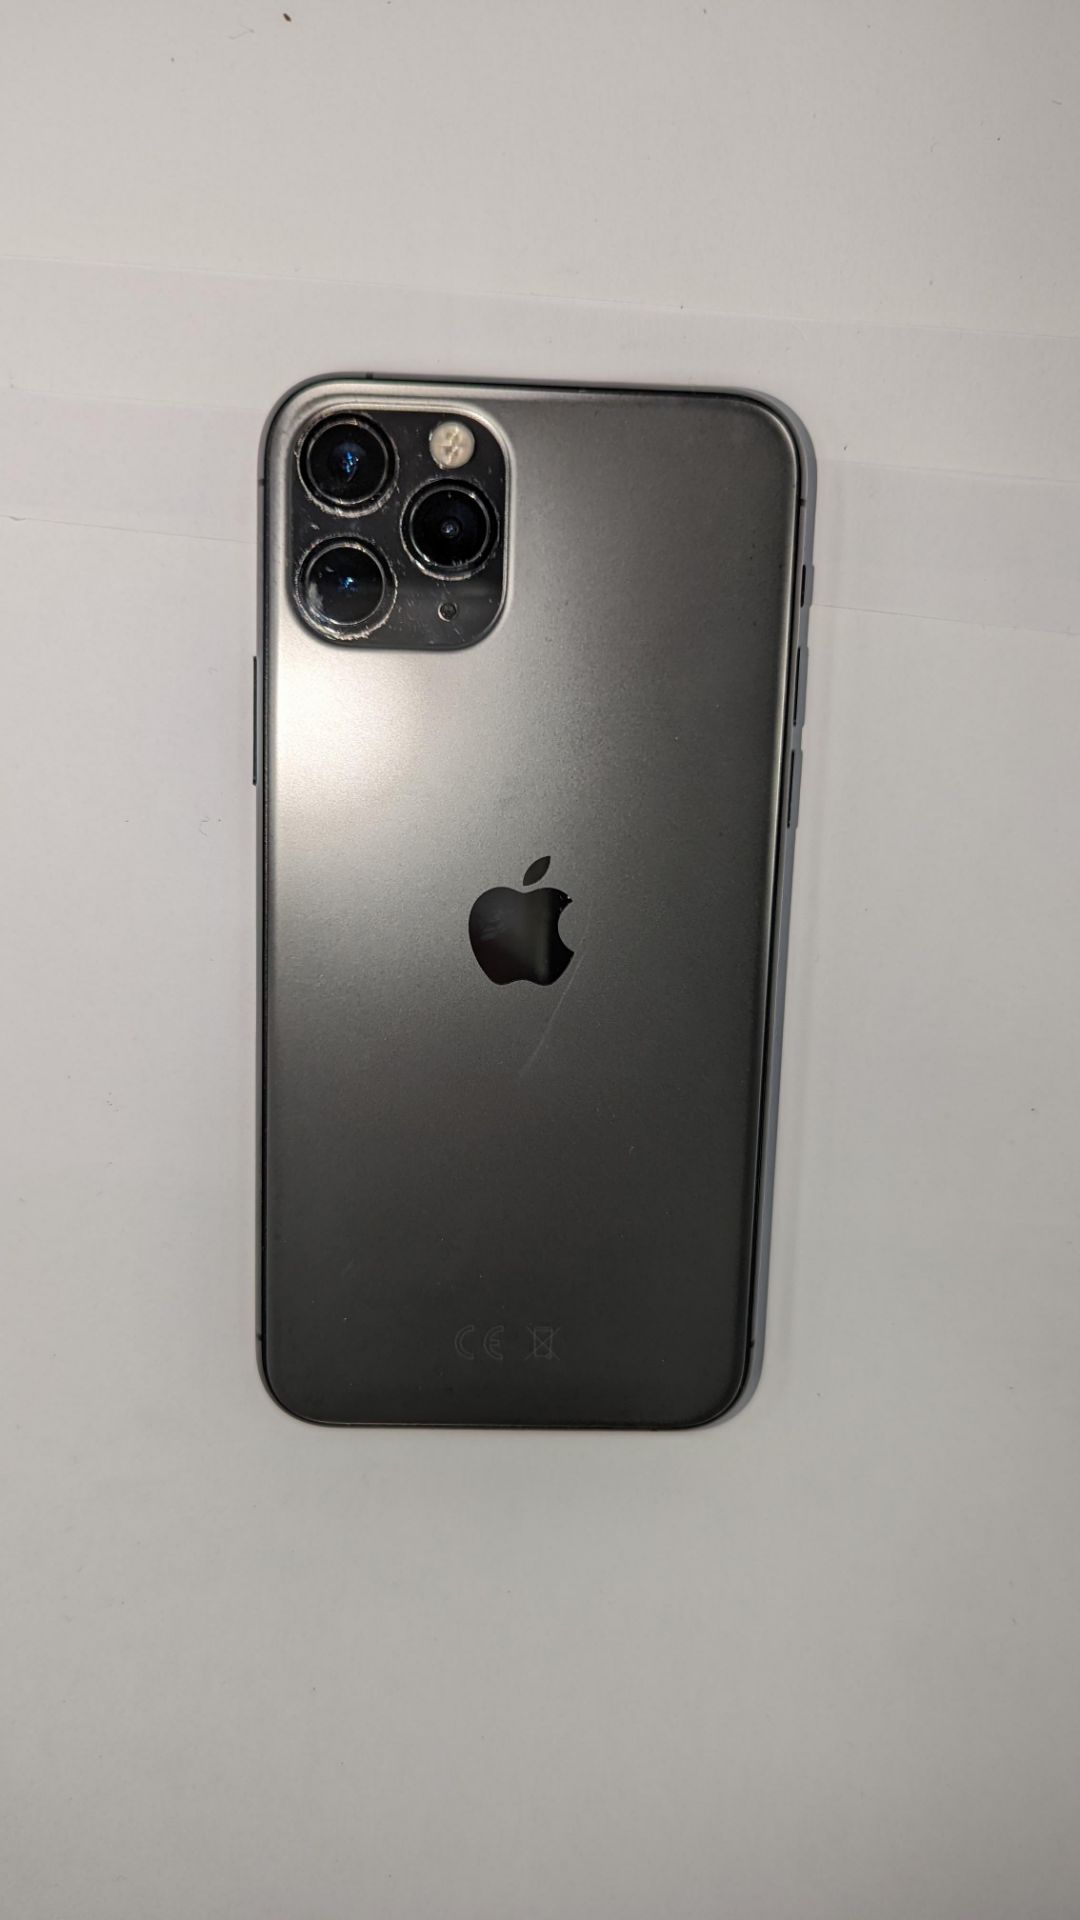 Apple iPhone 11 Pro, 256GB capacity, model MWC72B/A. NB no charger, ancillaries or box - Image 10 of 11